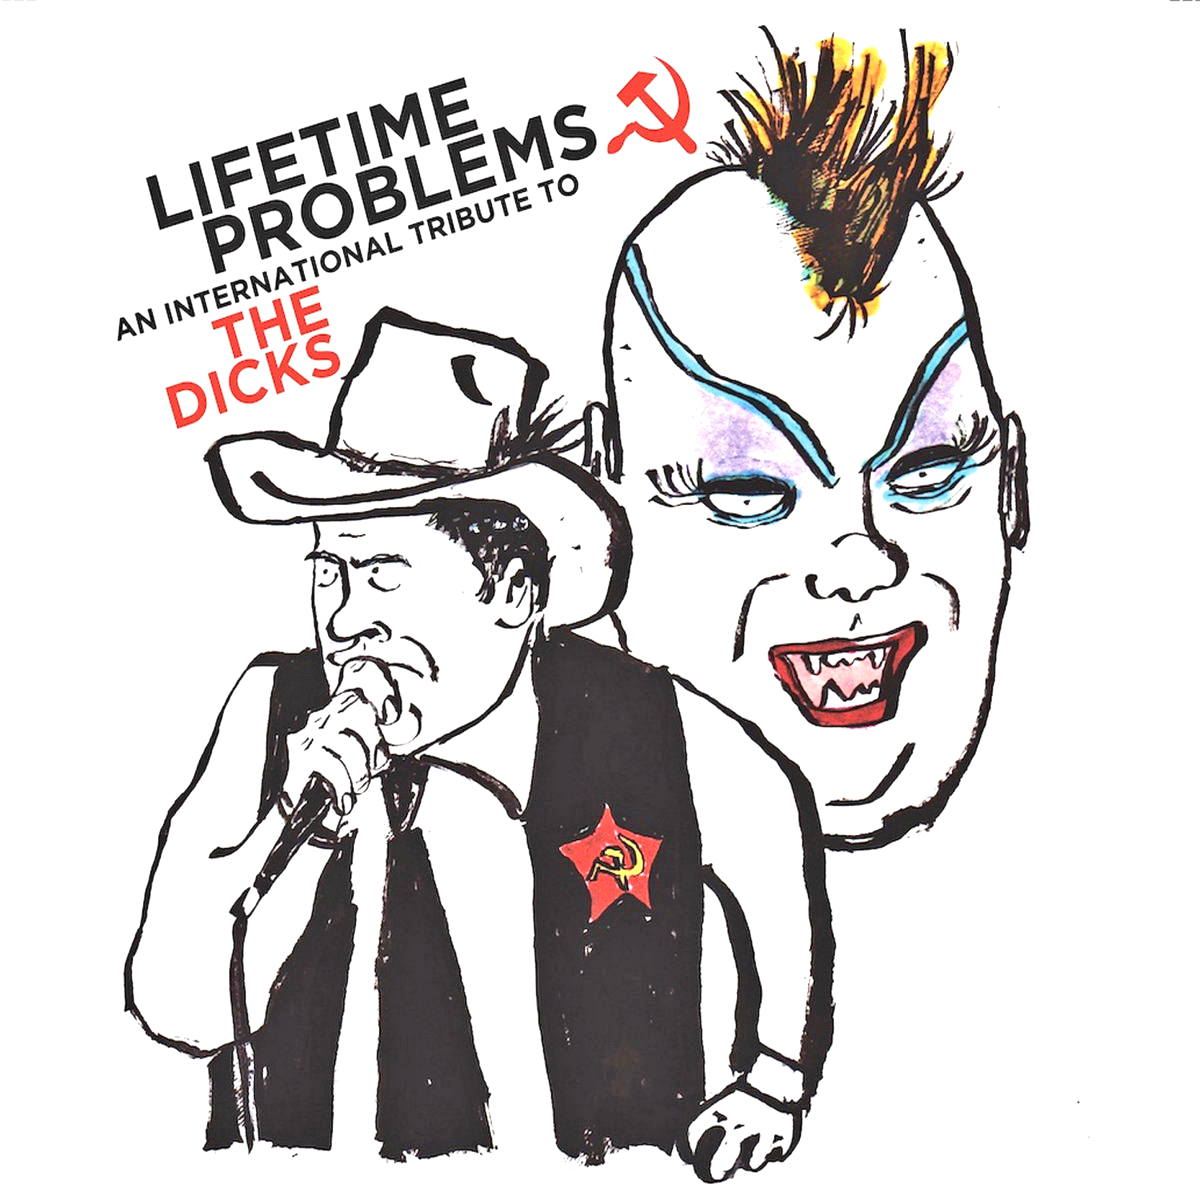 V/A- Lifetime Problems An International Tribute To The Dicks 7" ~W/ BART + THE BRATS, ILLEGAL LEATHER!